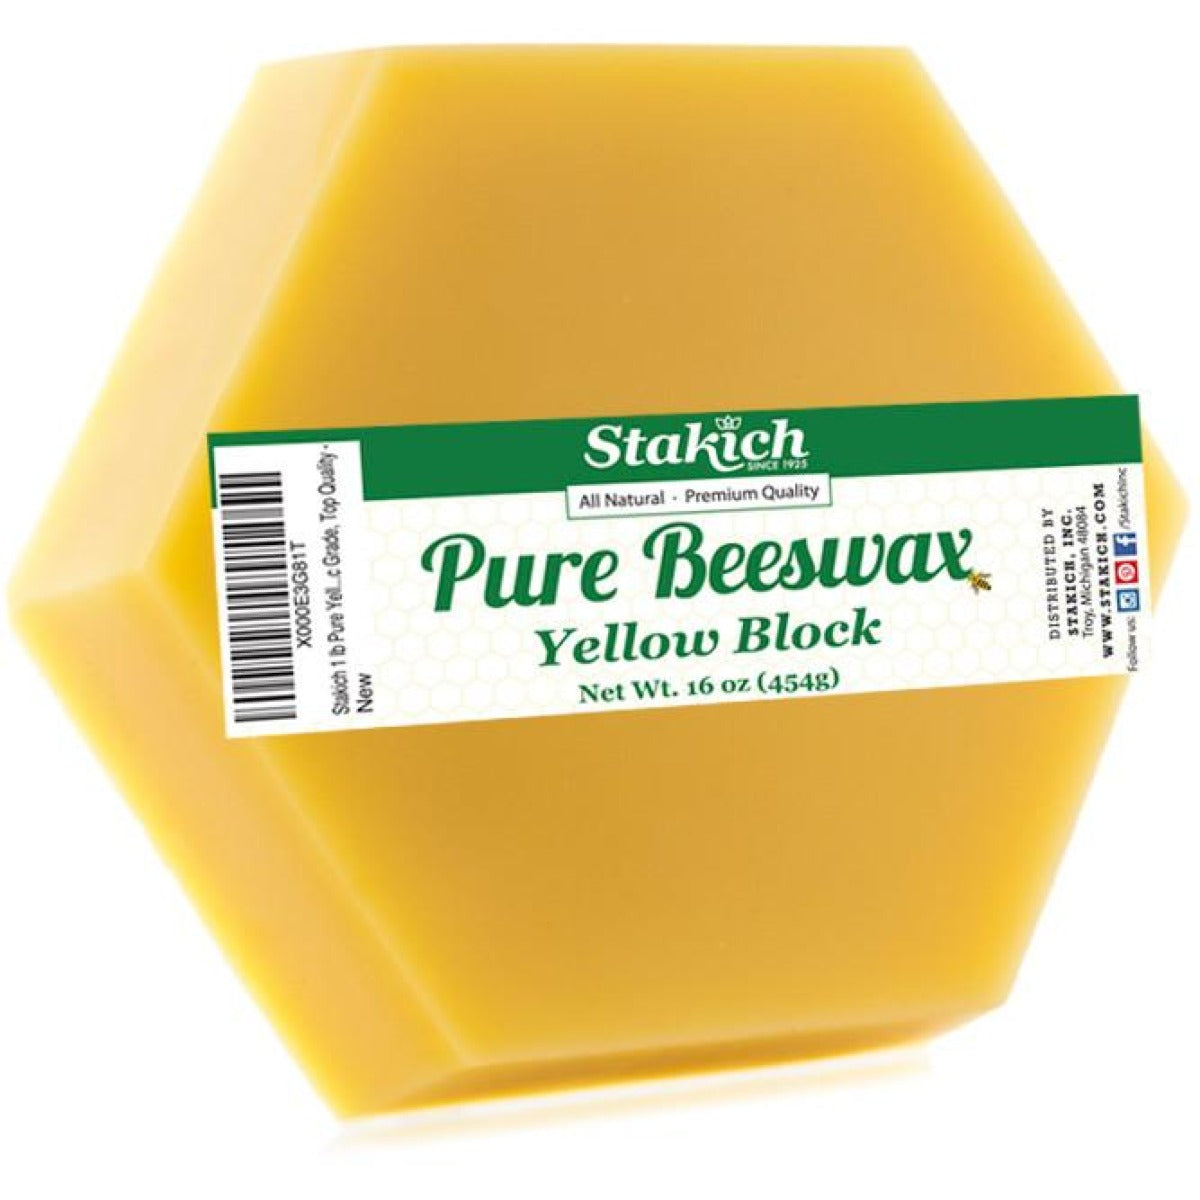 Candle Making Beeswax Kit (200 Sheets) - Stakich